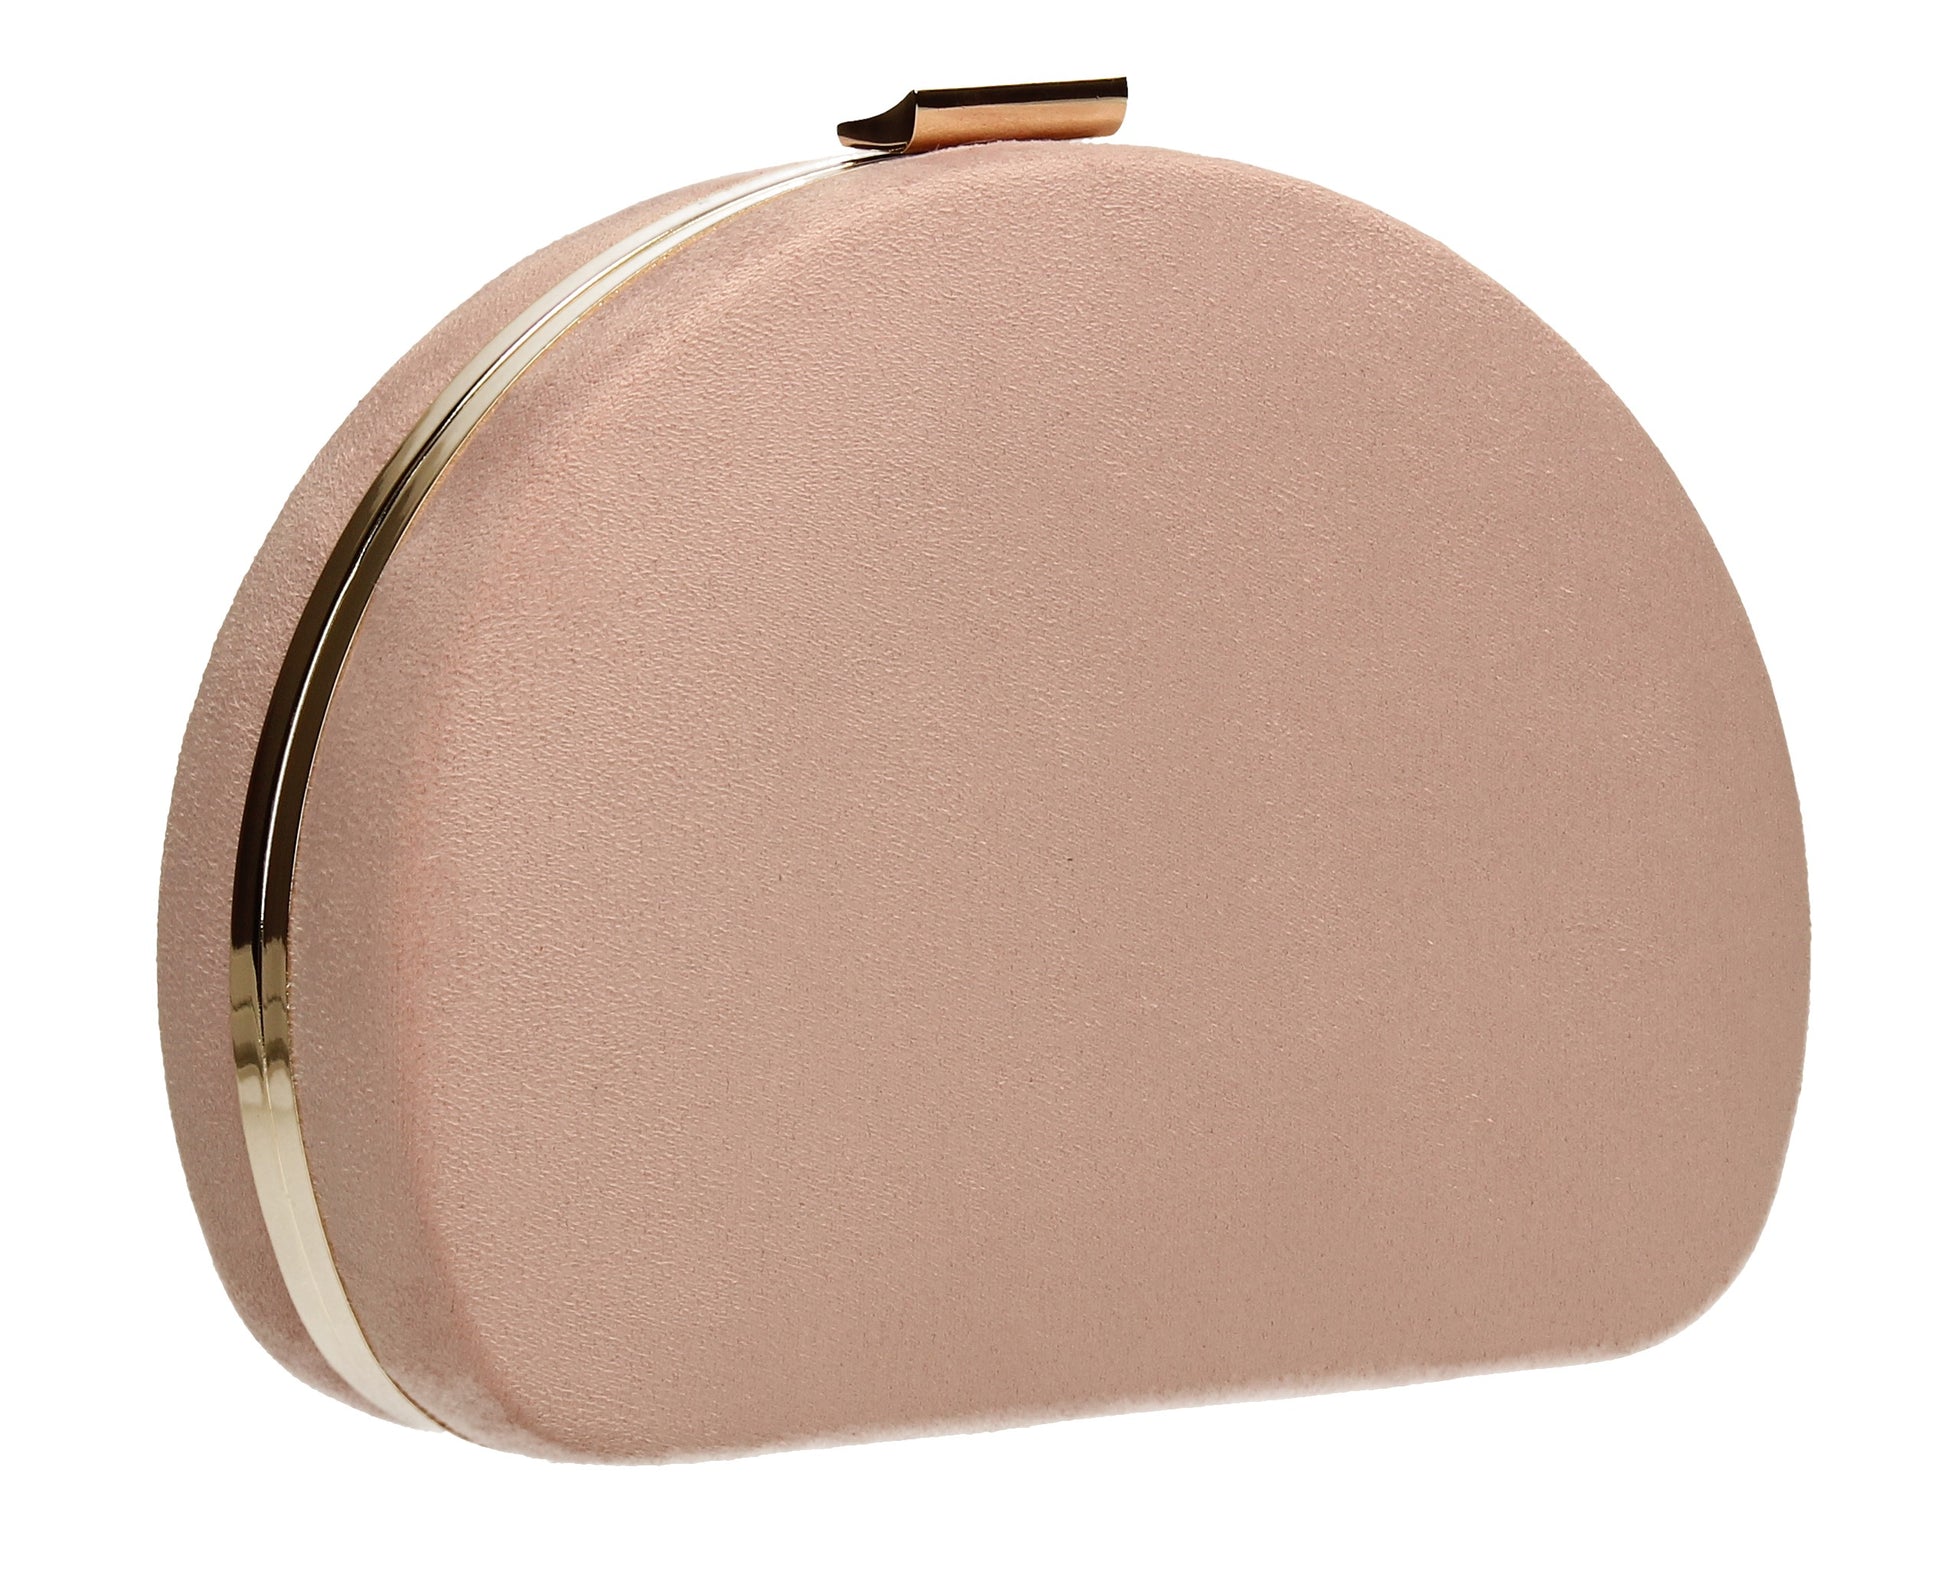 SWANKYSWANS Gina Curve Clutch Bag Pink Cute Cheap Clutch Bag For Weddings School and Work